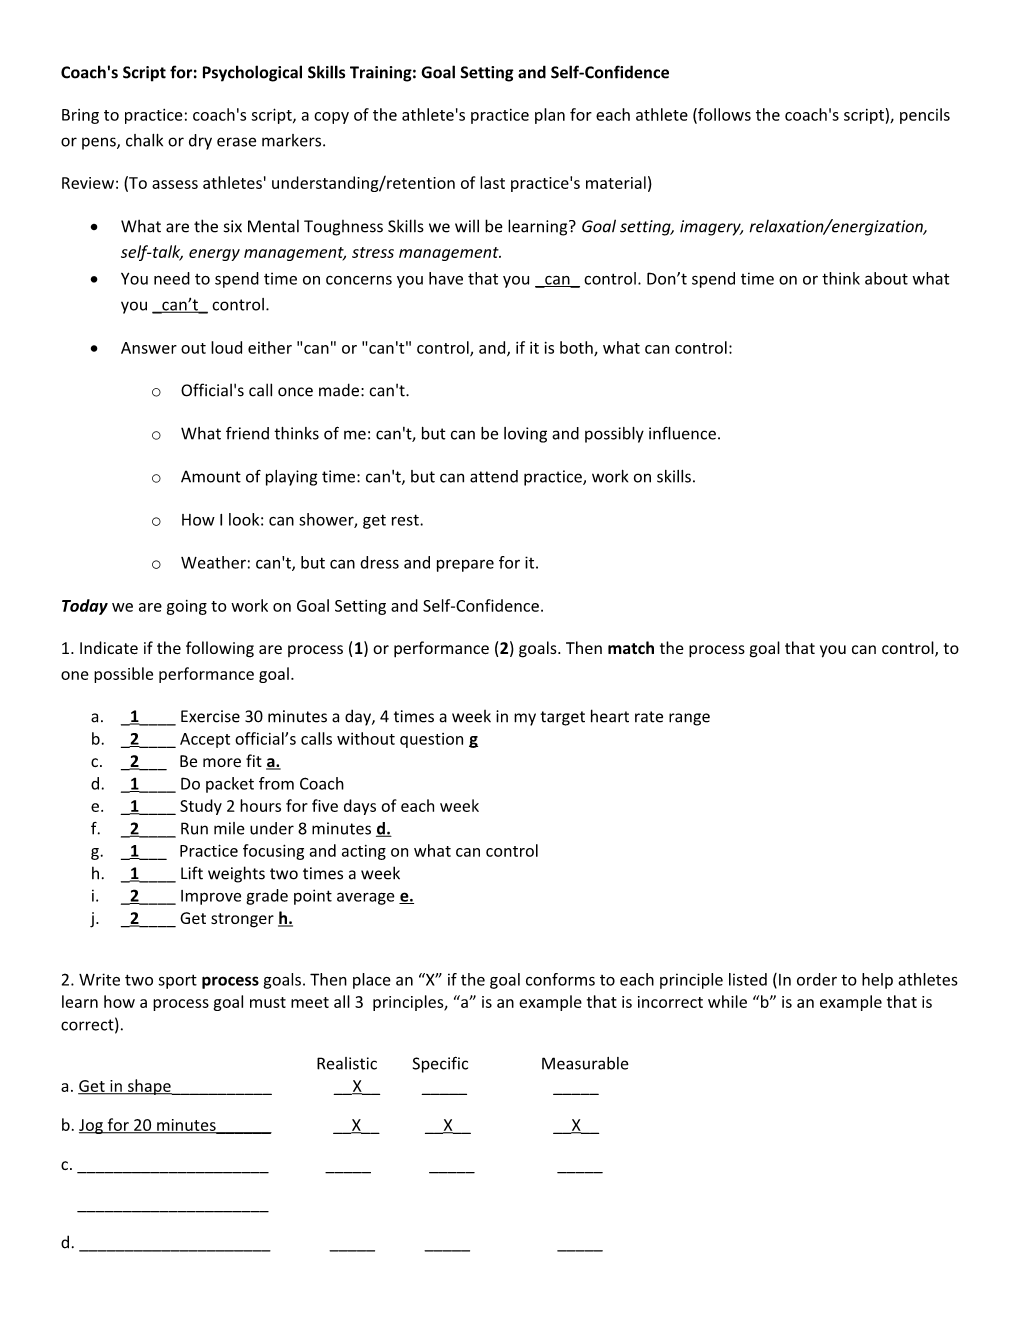 Coach's Script For: Psychological Skills Training: Goal Setting and Self-Confidence